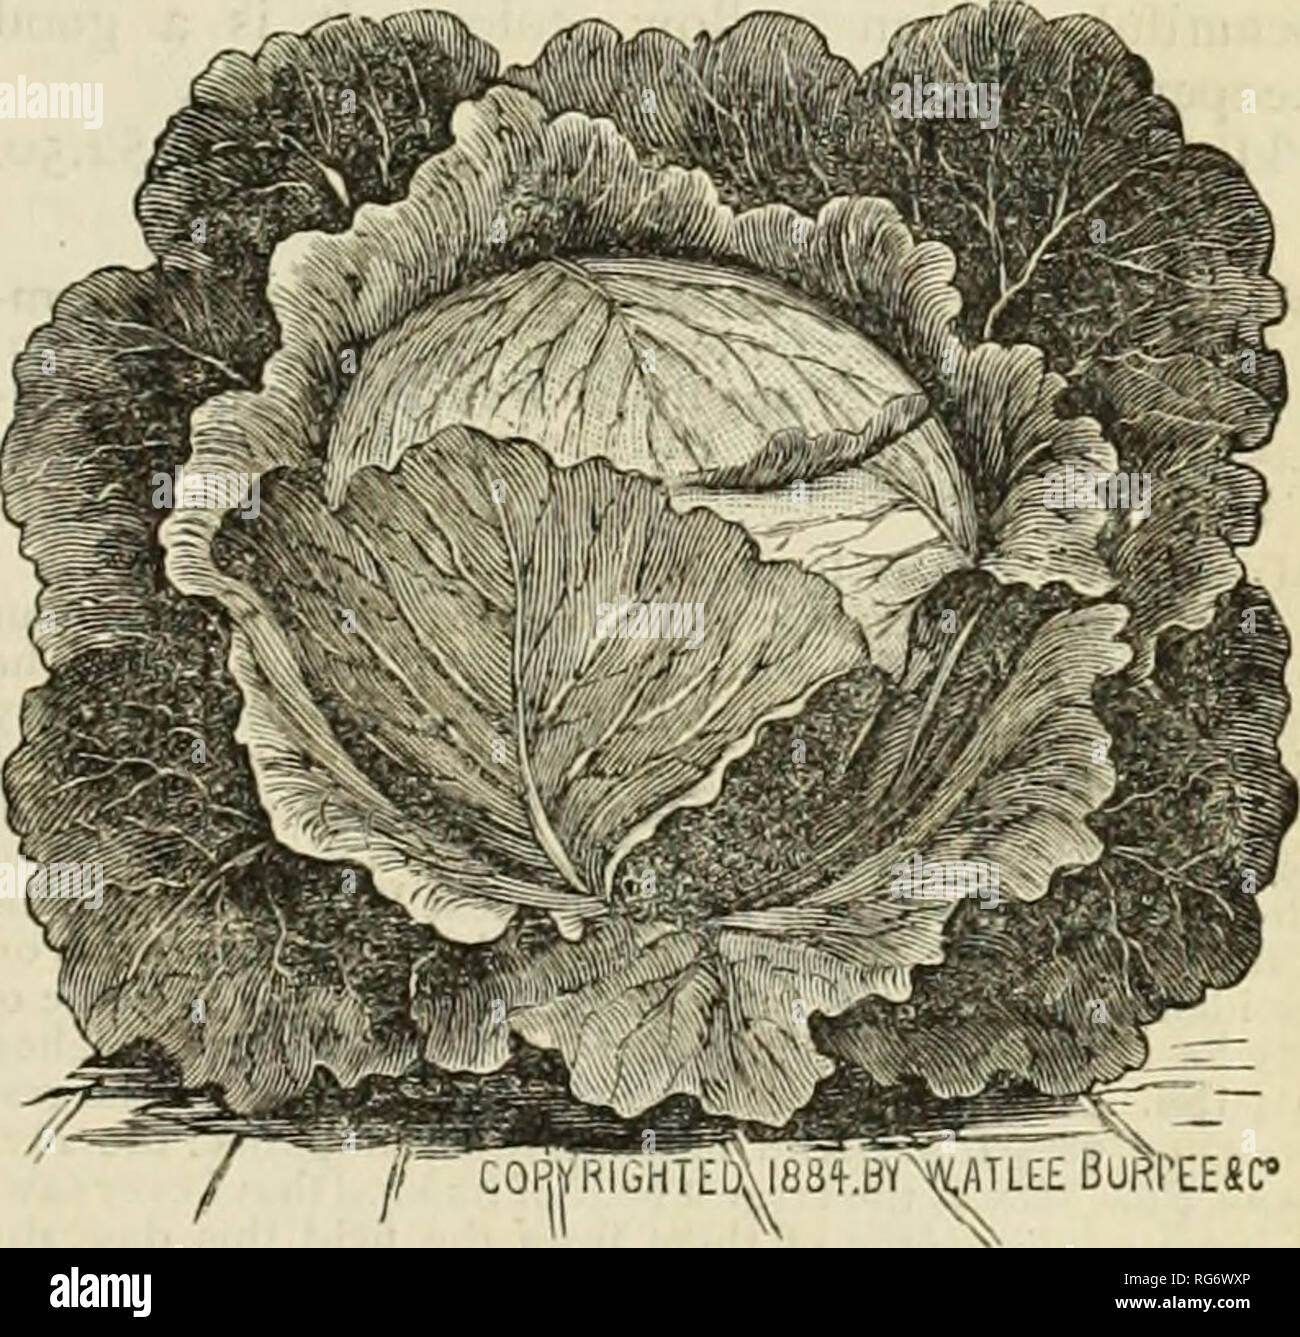 . Burpee's farm annual : garden, farm, and flower seeds. Nursery stock Pennsylvania Philadelphia Catalogs; Flowers Pennsylvania Catalogs; Vegetables Pennsylvania Catalogs; Seeds Pennsylvania Catalogs. FILUEKKRAUT CAEliACE. FILDERKRAUT CABBAGE. We think so highly of this cabljage that we t have had a new engraving made, to better illus- ; trate its shape and appearance. The Filderkraut j is a great favorite in Germany, and needs only to become known to be equally popular in America. The Germans use it largely in the manufacture of &quot; kraut.&quot; The pointed, conical heads attain large si/c Stock Photo